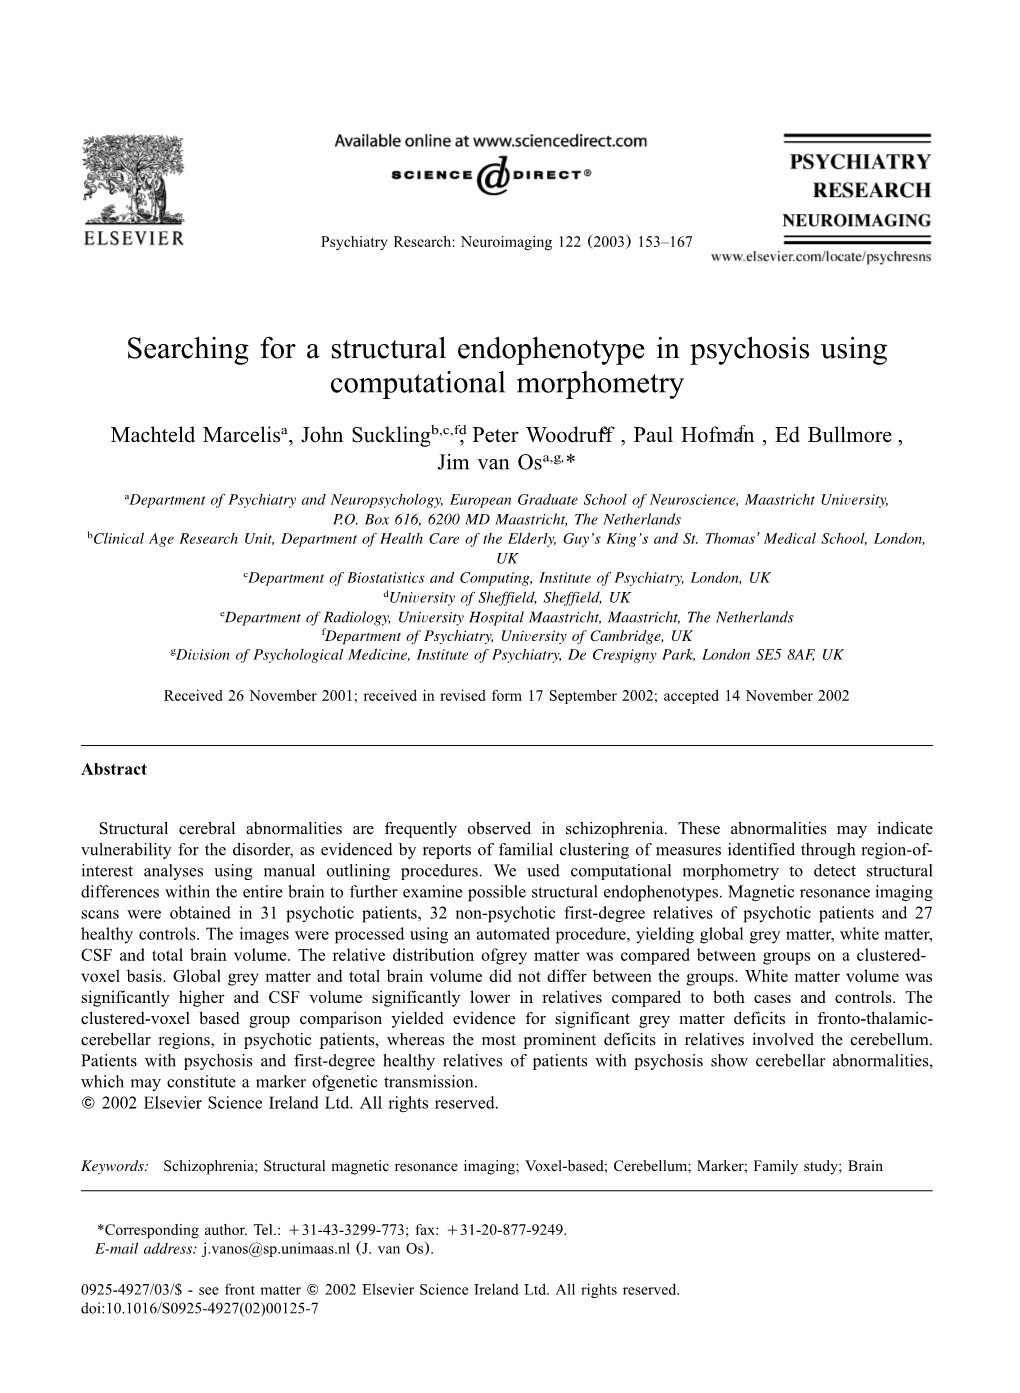 Searching for a Structural Endophenotype in Psychosis Using Computational Morphometry